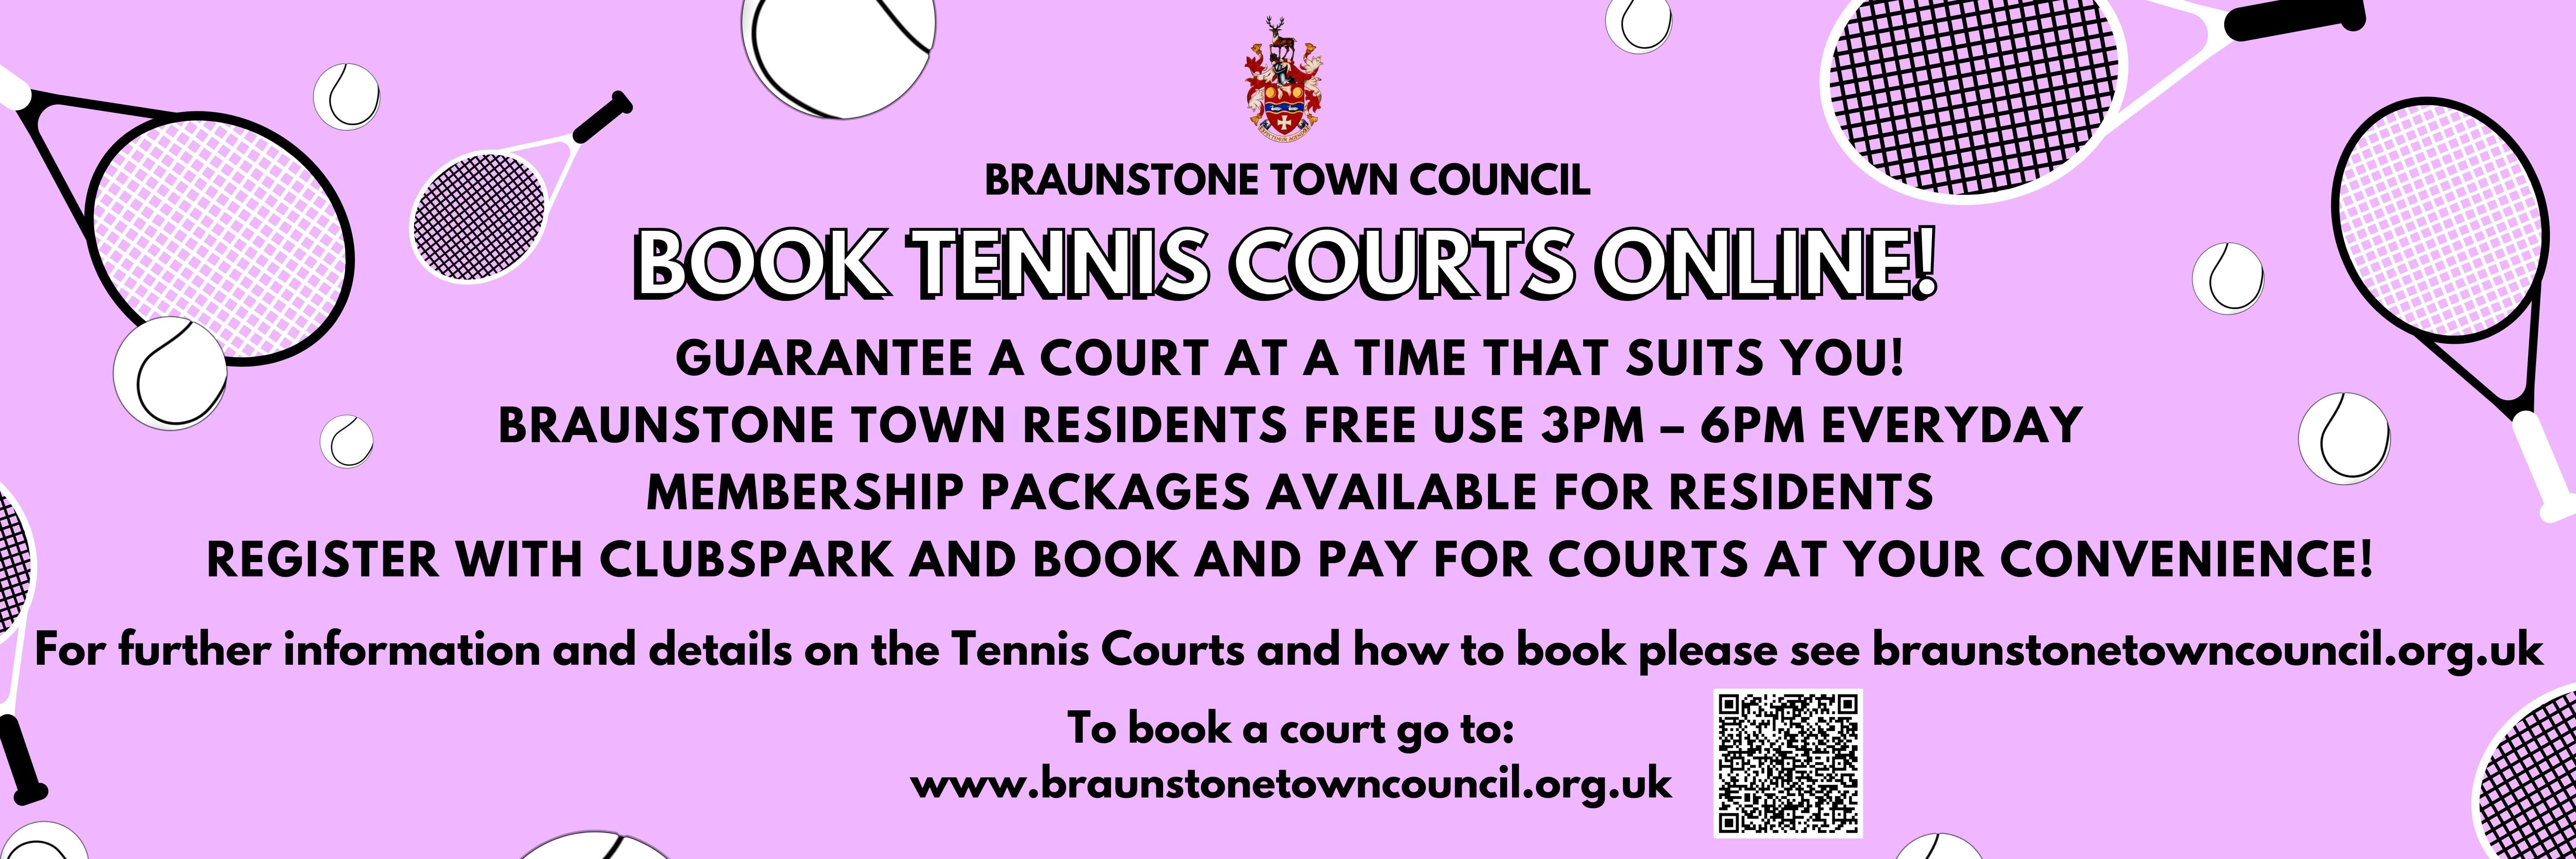 BOOK TENNIS COURTS ONLINE GUARANTEE A COURT AT A TIME THAT SUITS YOU BRAUNSTONE TOWN RESIDENTS FREE USE 3PM 6PM EVERYDAY MEMBERSHIP PACKAGES AVAILABLE FOR RESIDENTS REGISTER WITH CLUBSPARK AND BOOK 6